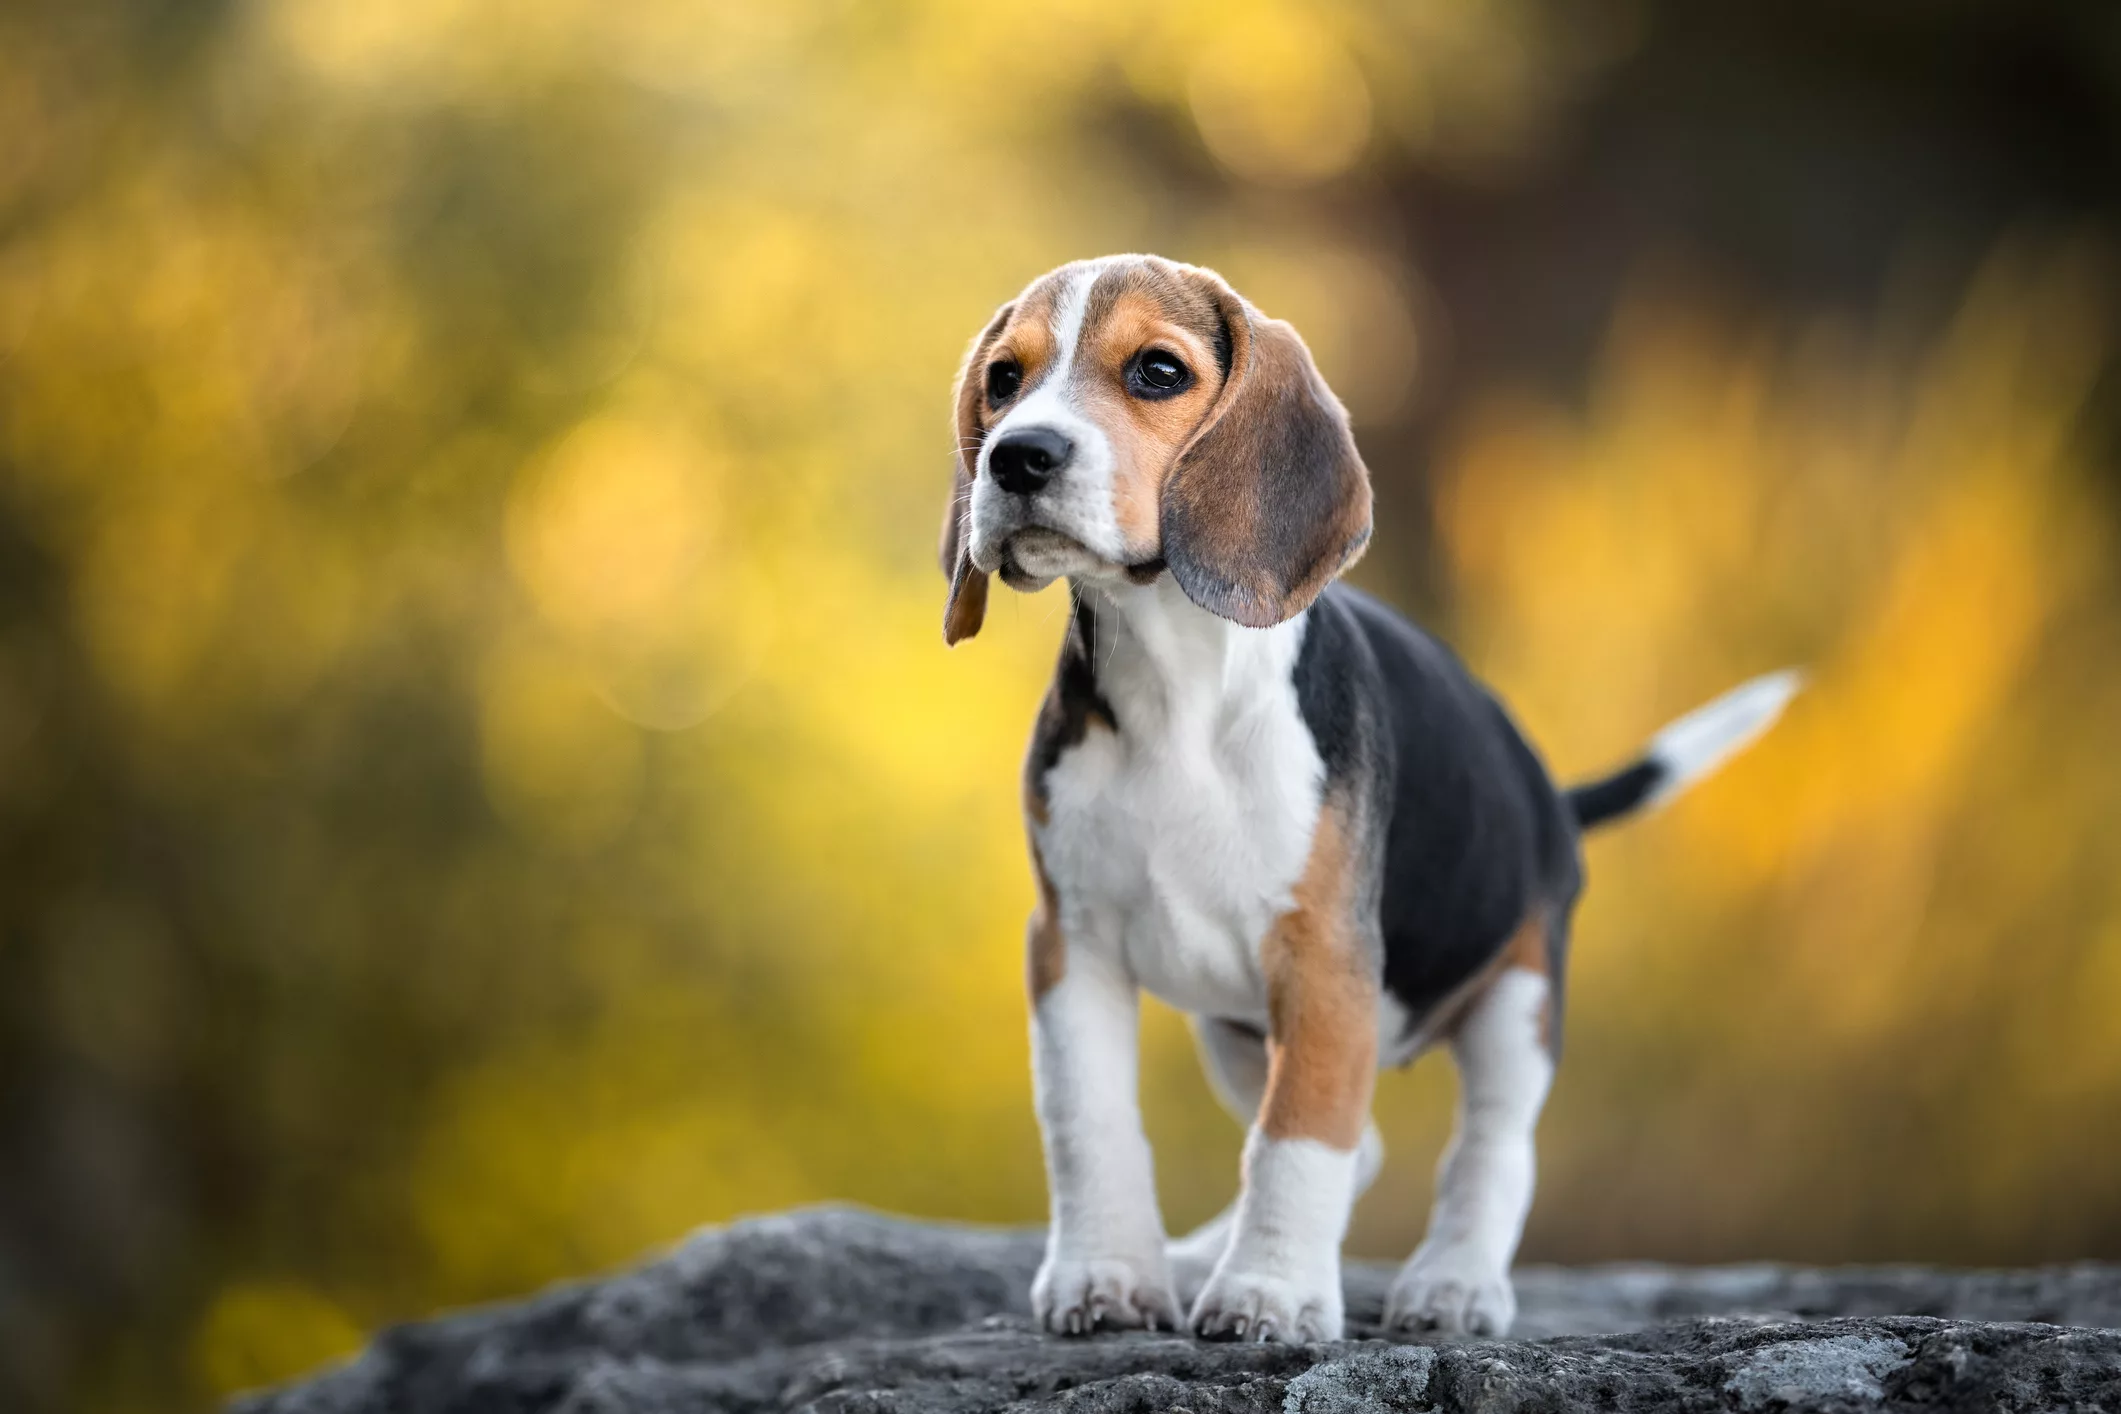 close-up-of-beagle-looking-away-while-standing-on-rockpoland